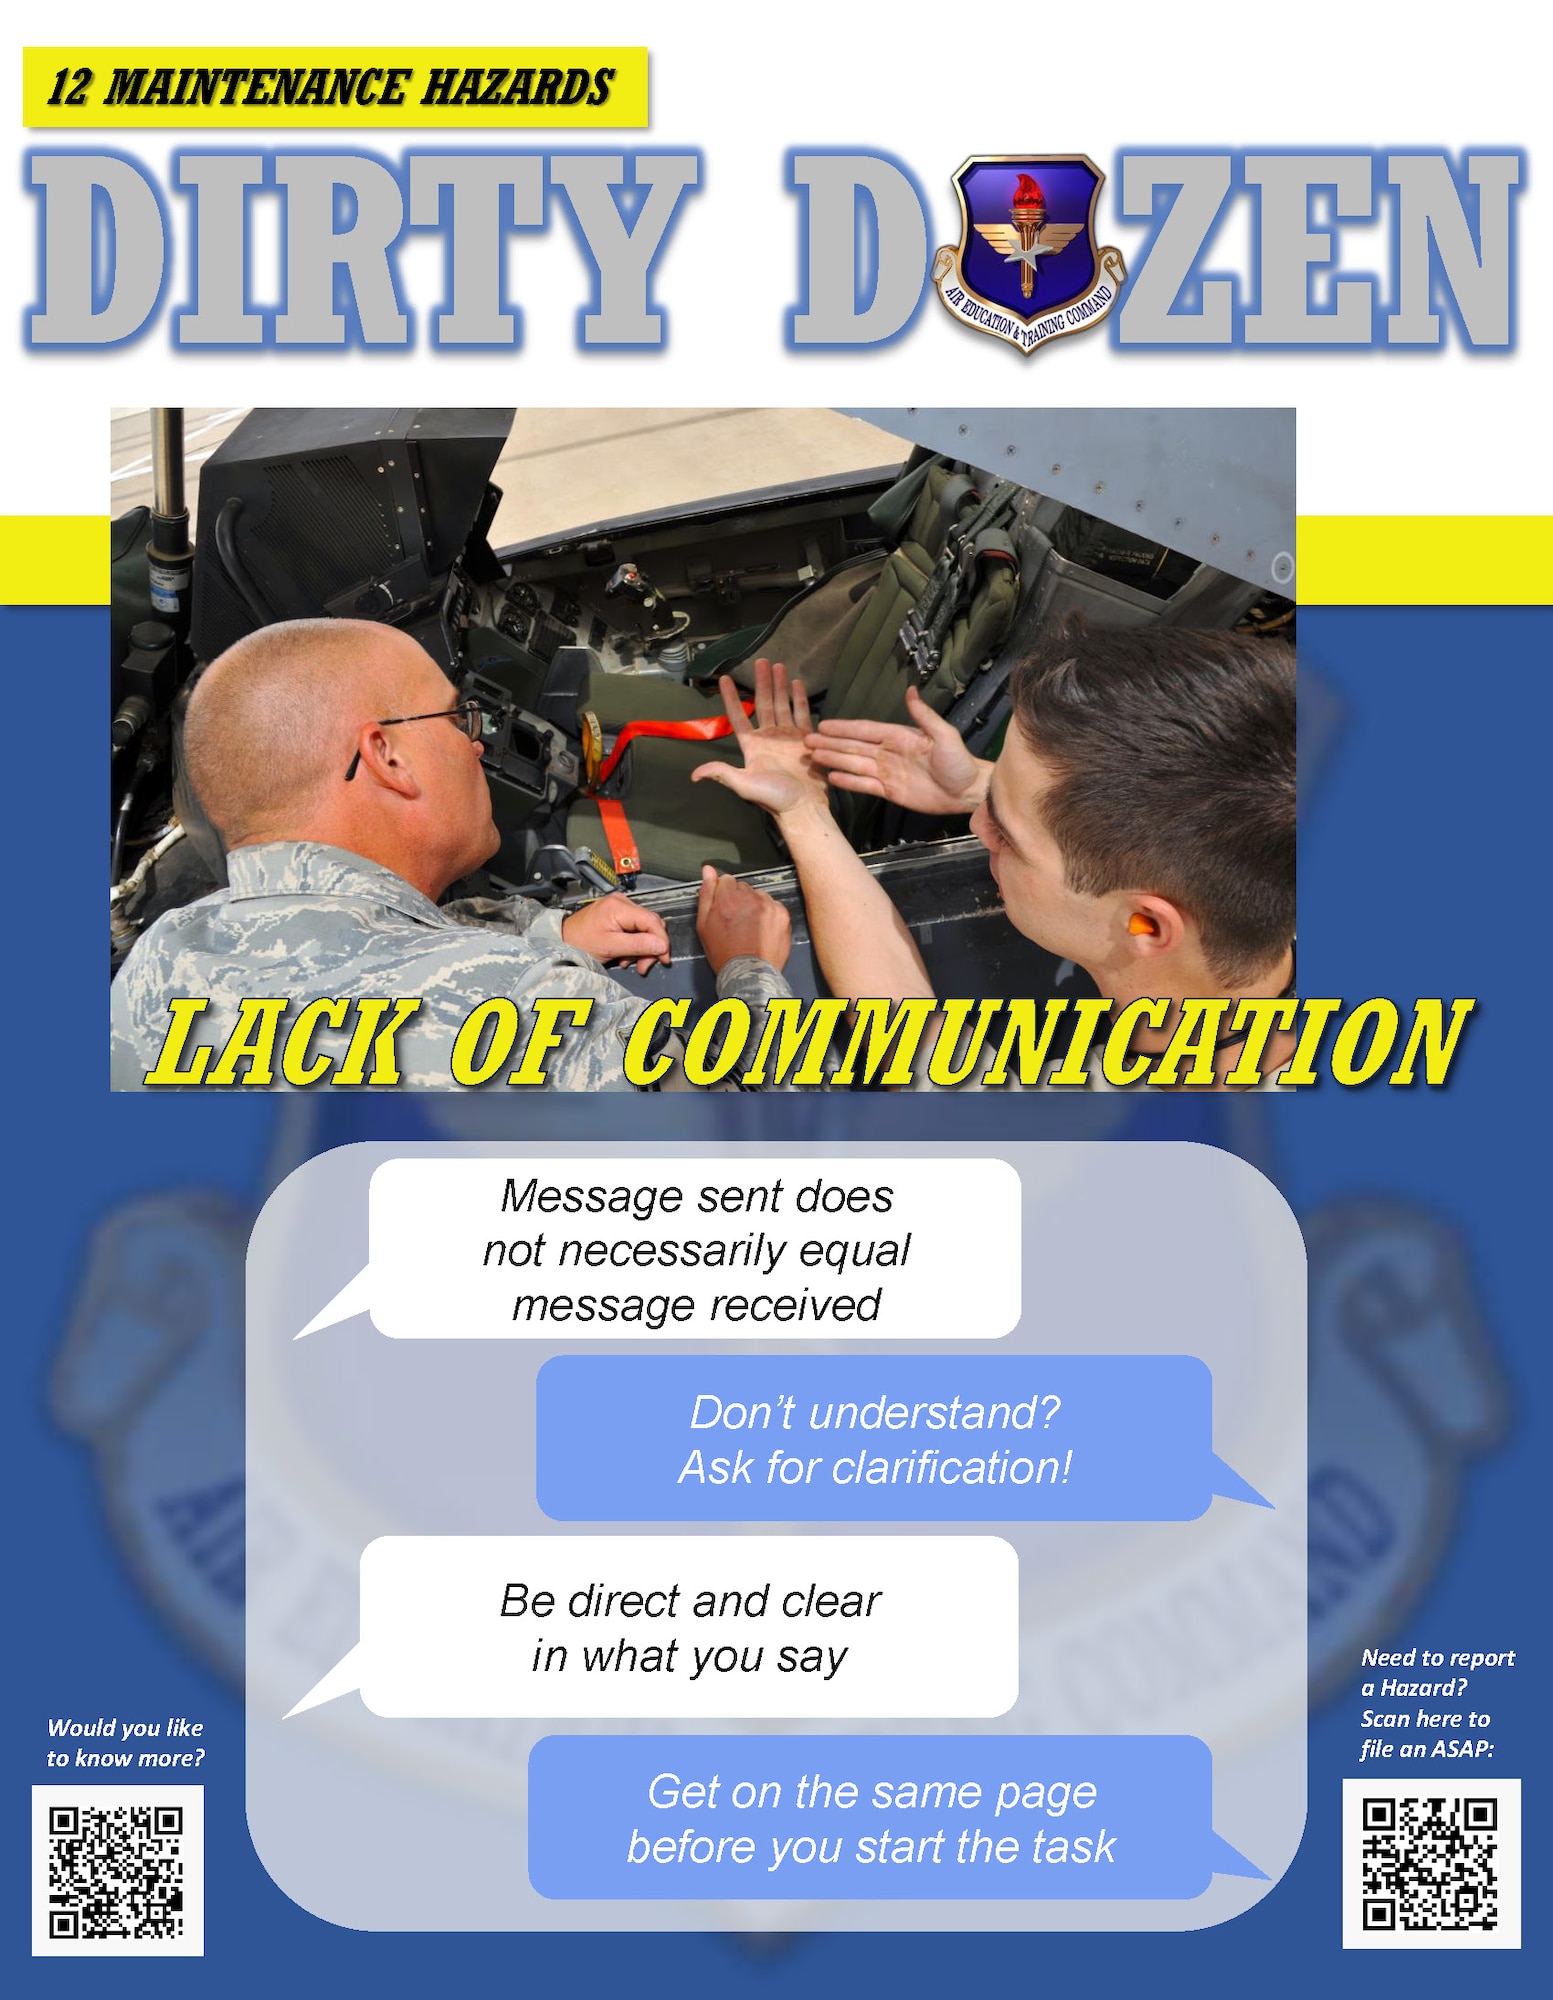 Lack of communication is one of the Dirty Dozen, which highlights common human error factors in aircraft maintenance mishaps.